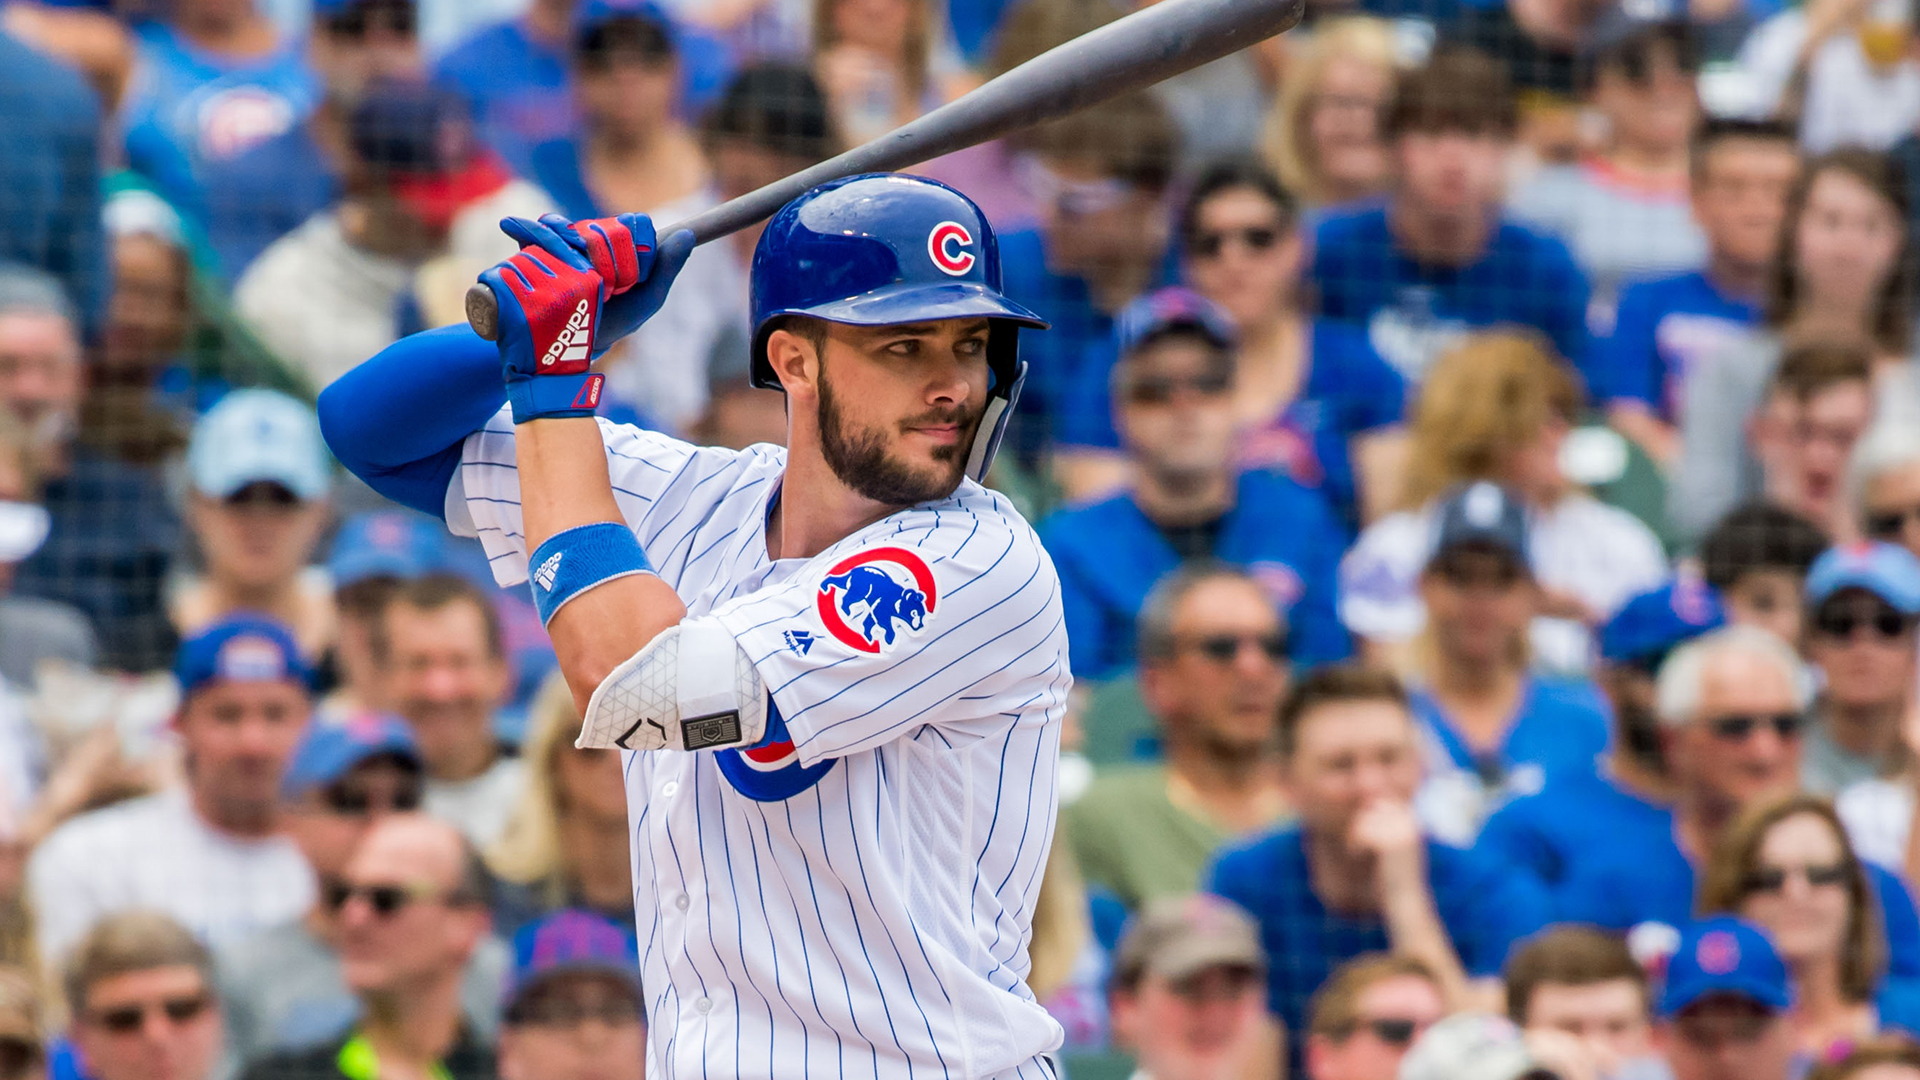 Cubs Talk Podcast: Is Kris Bryant the new Curt Flood? – NBC Sports Chicago